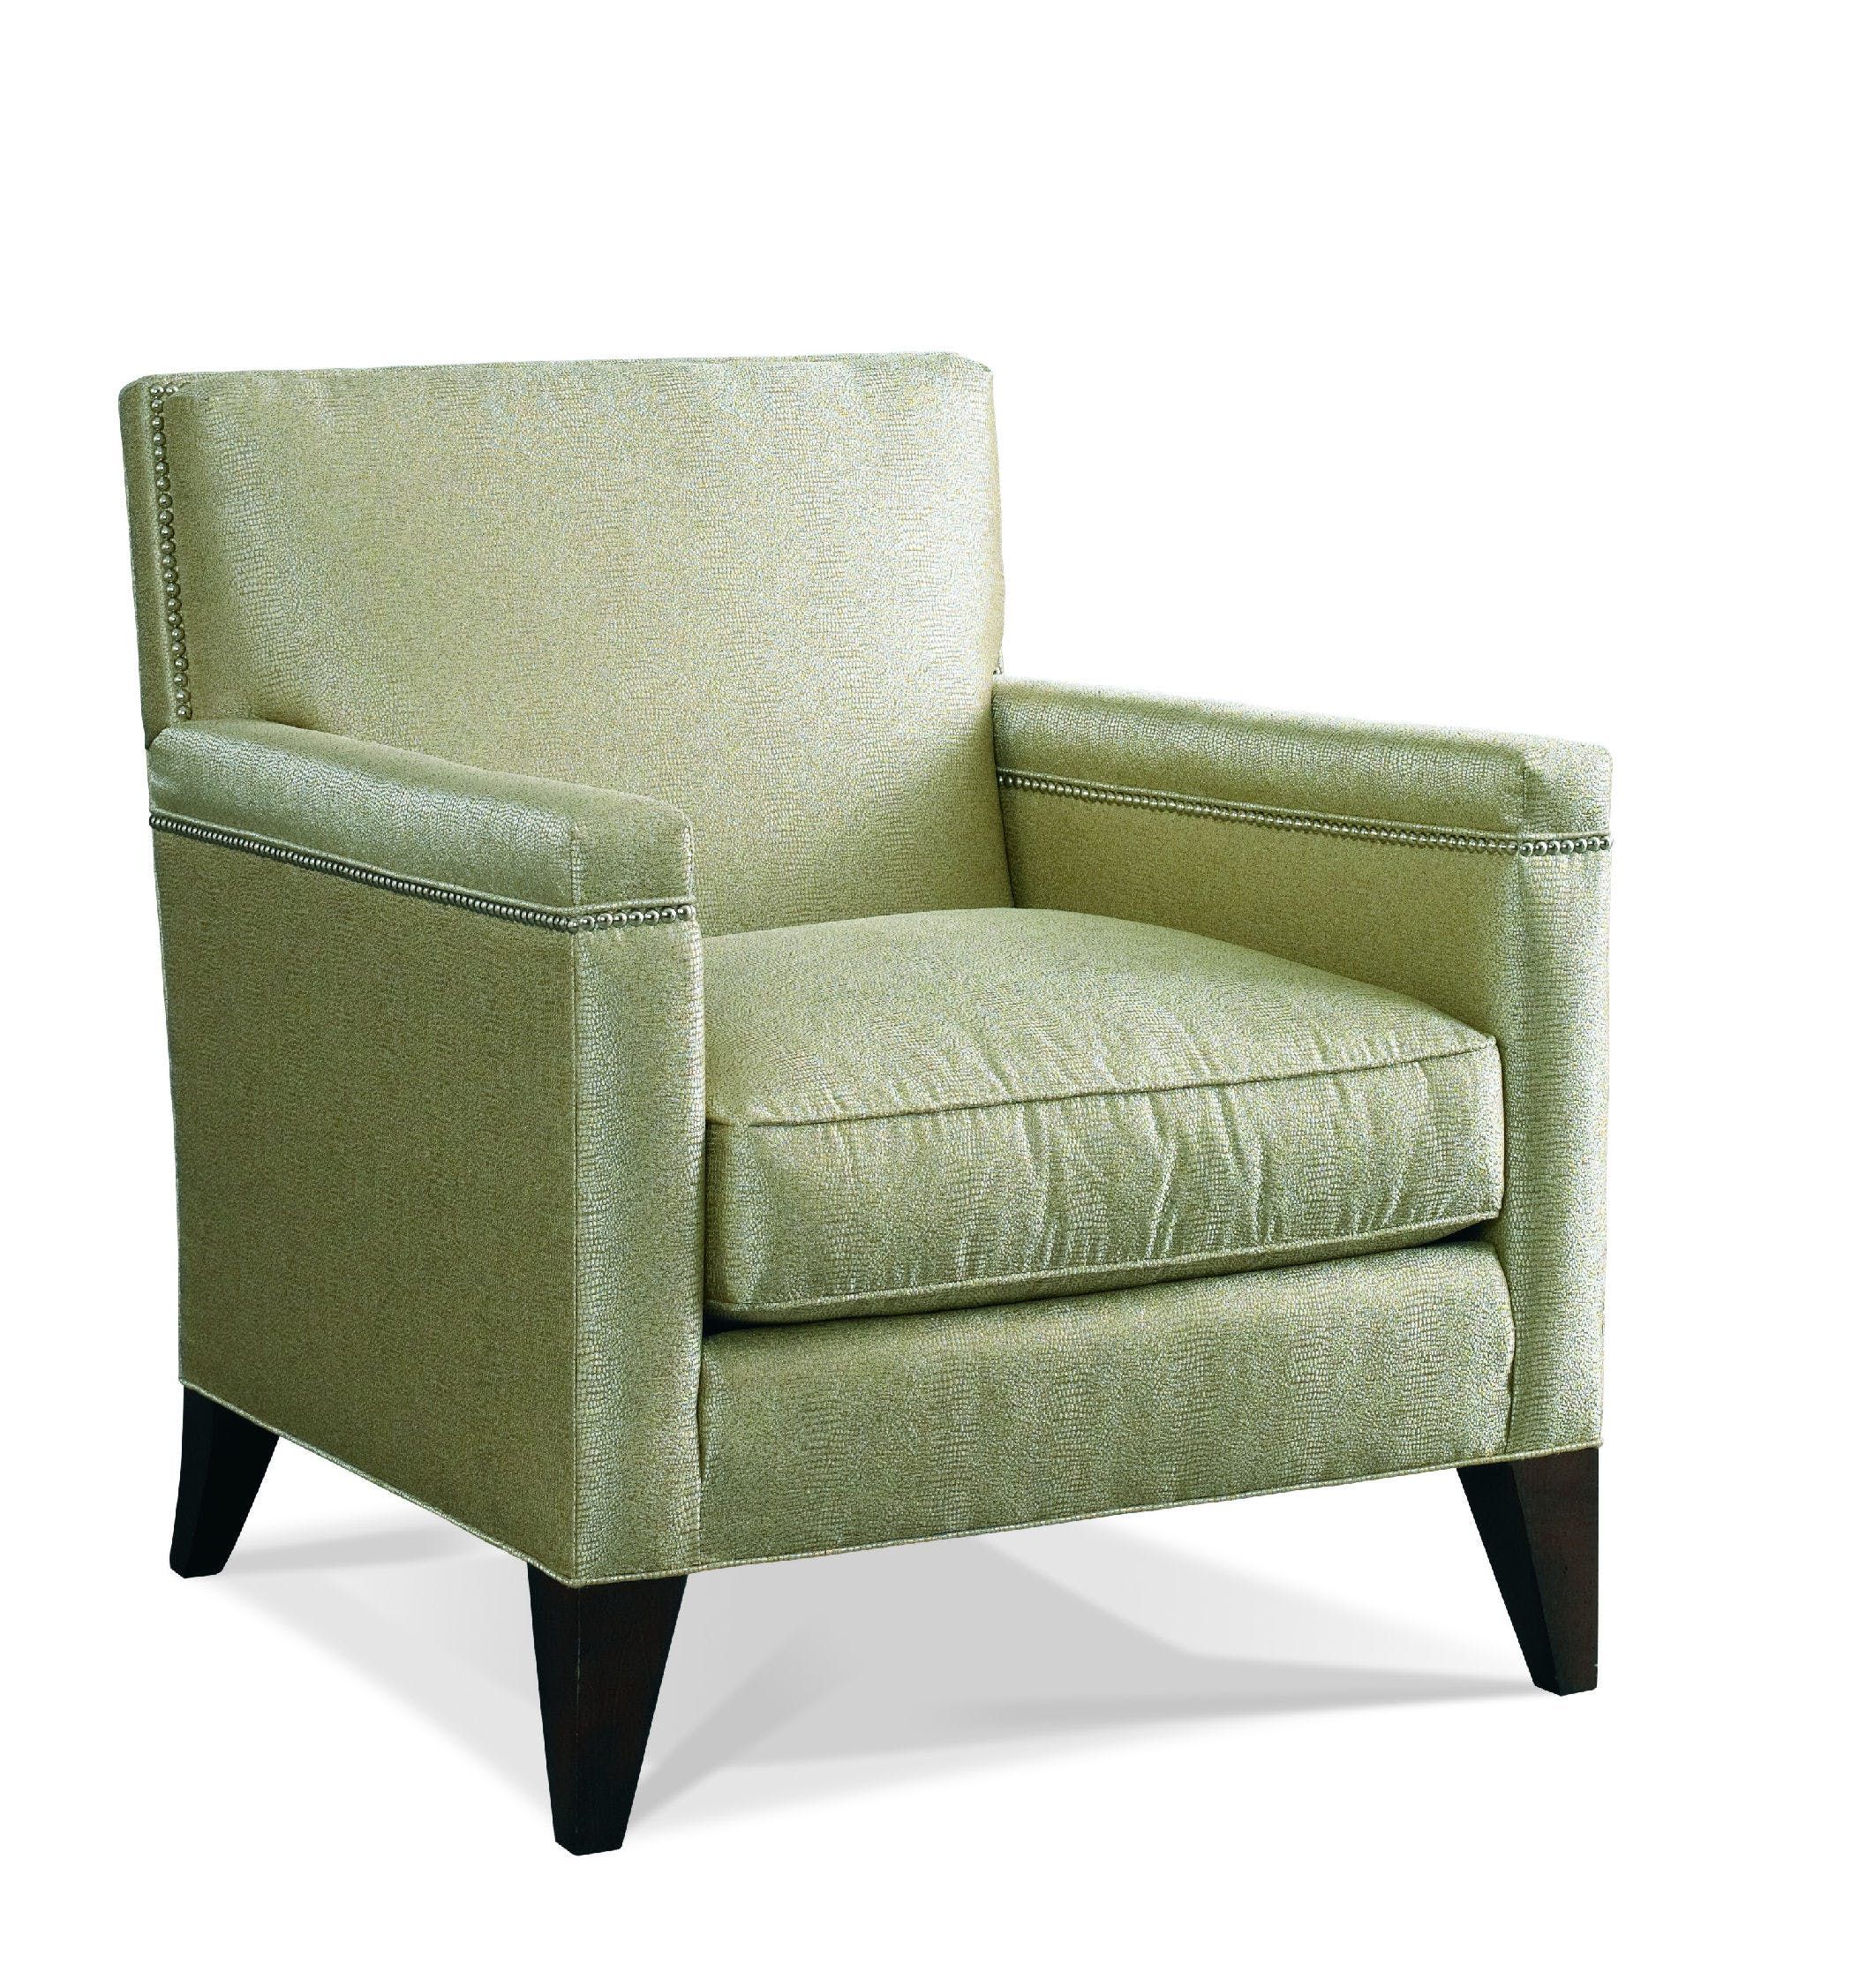 Living Room Upholstered Arm Chair At Greenbaum Small Bedroom Inside Armory Fabric Armchairs (View 5 of 15)